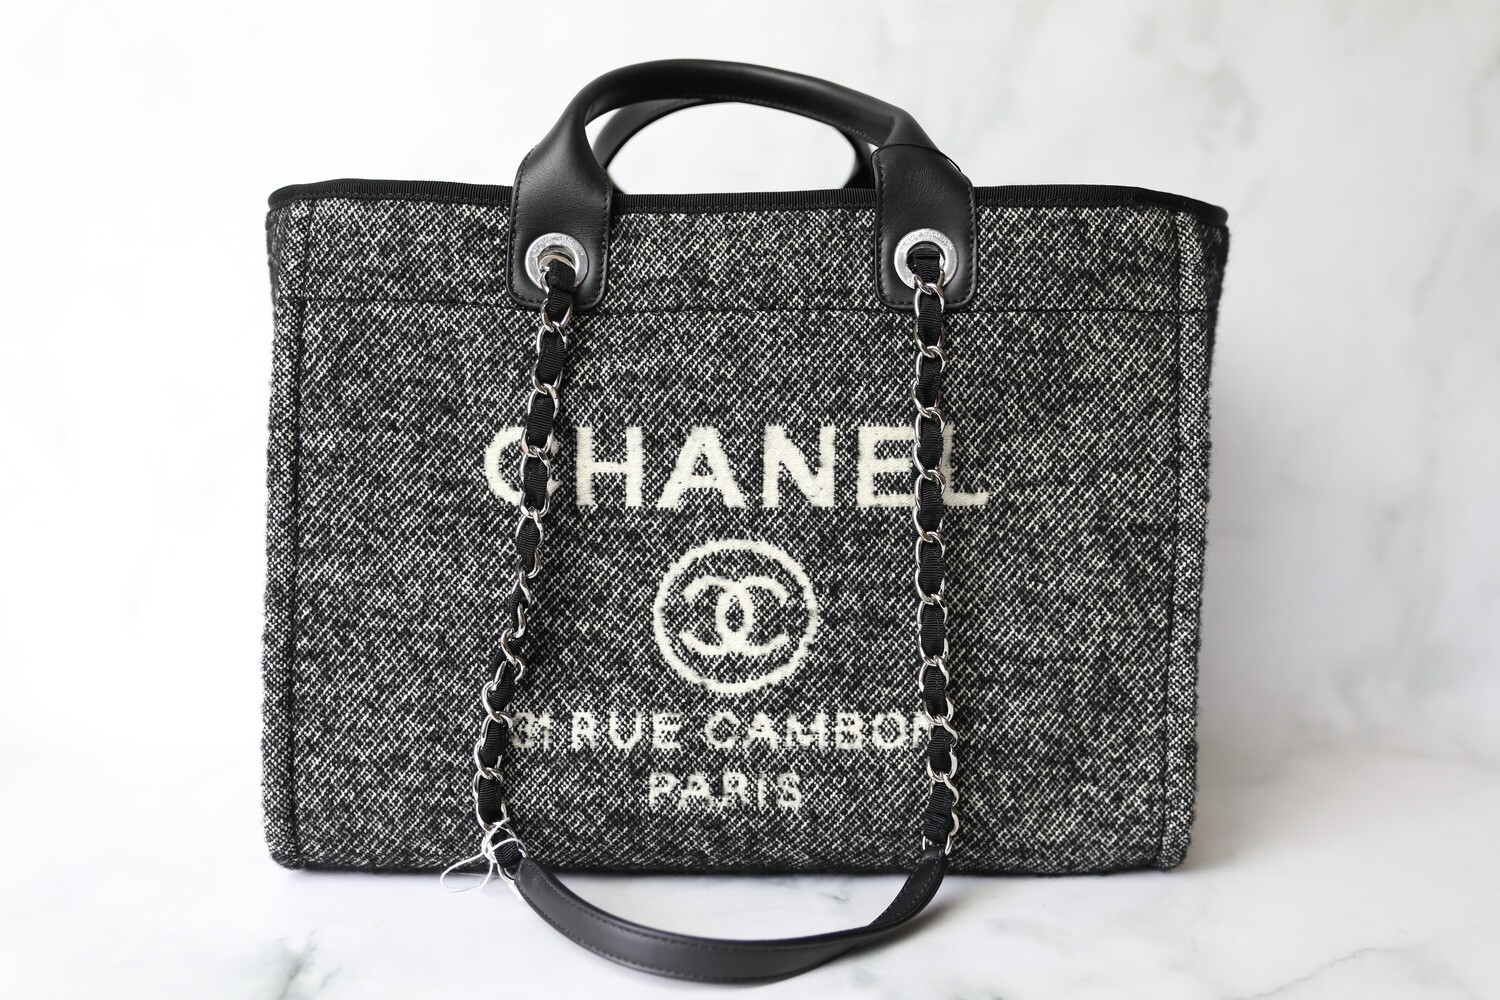 Chanel Deauville Large, Black and White Wool, New in Dustbag